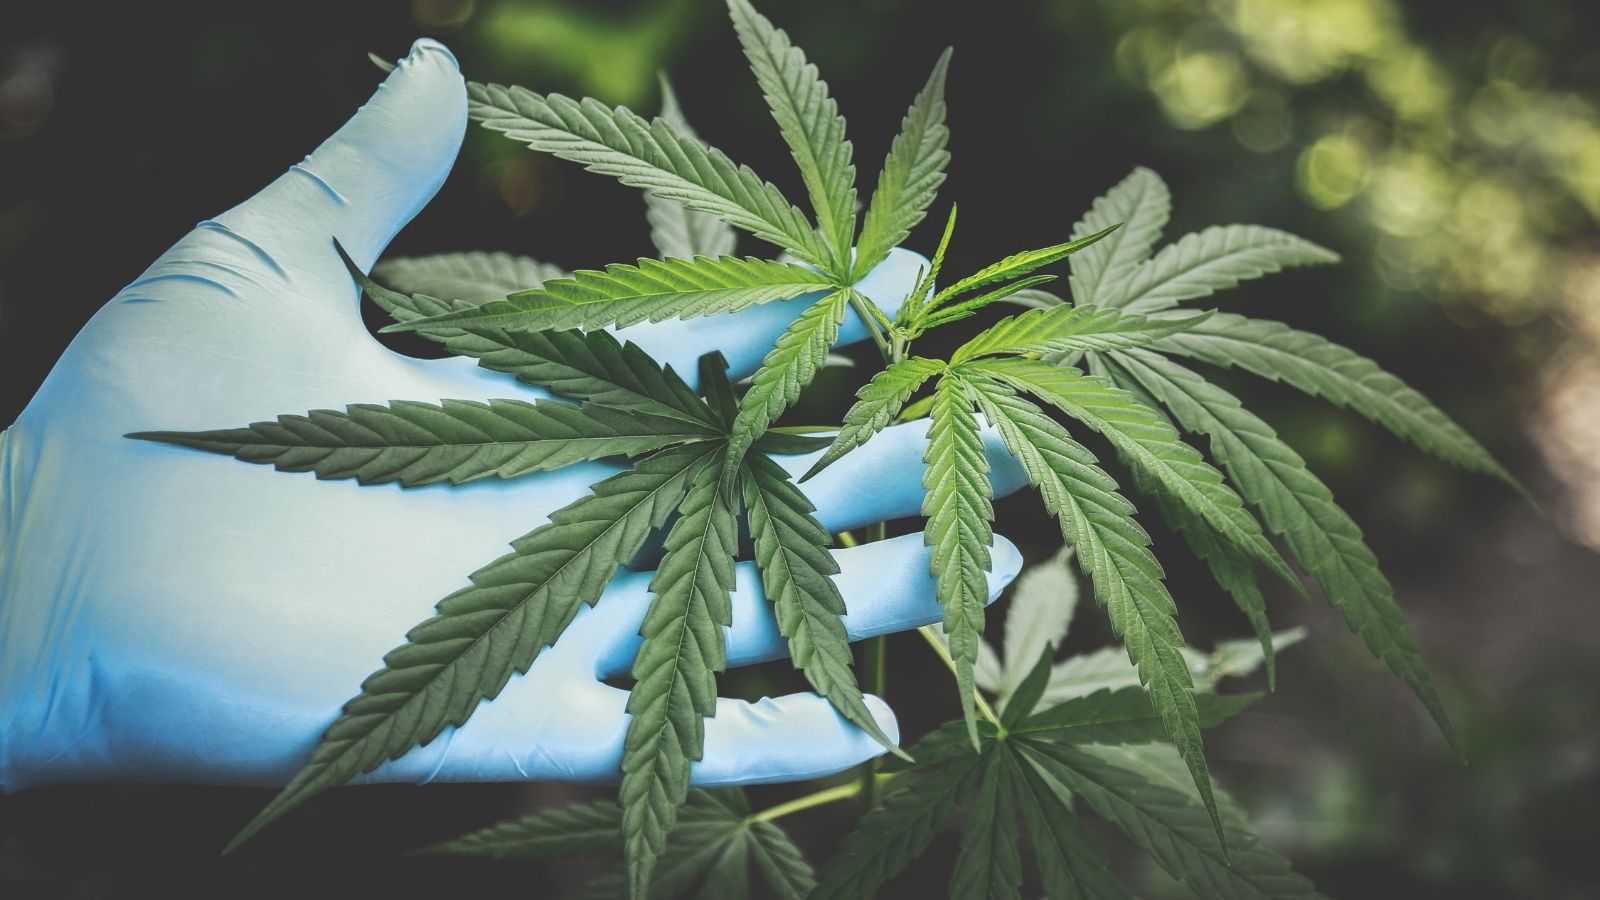 Green rush: the current investor high in cannabis